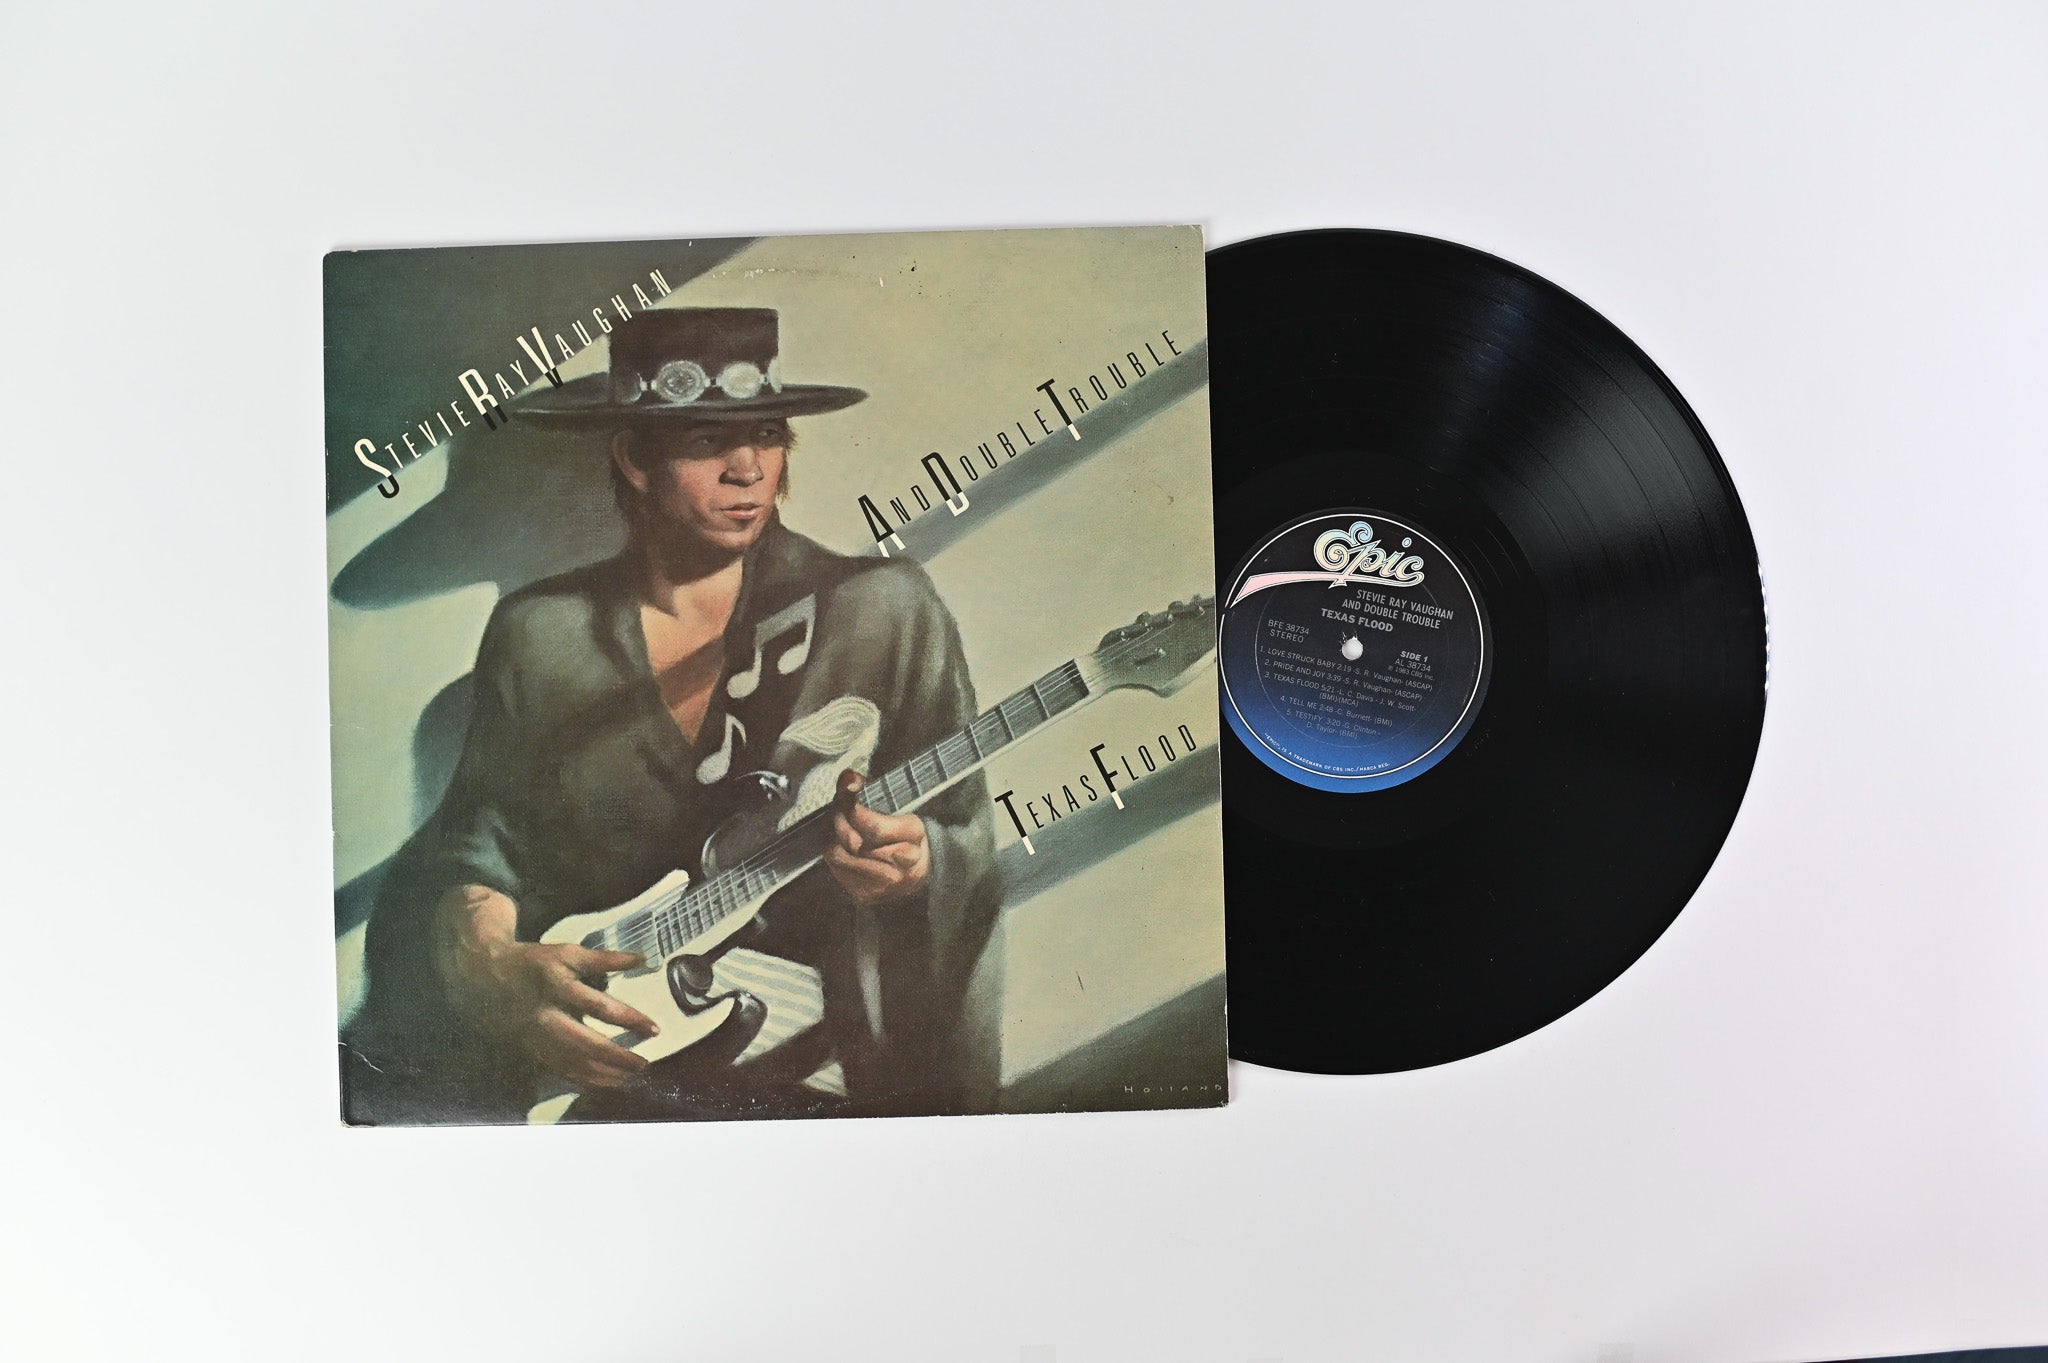 Stevie Ray Vaughan & Double Trouble - Texas Flood on Epic